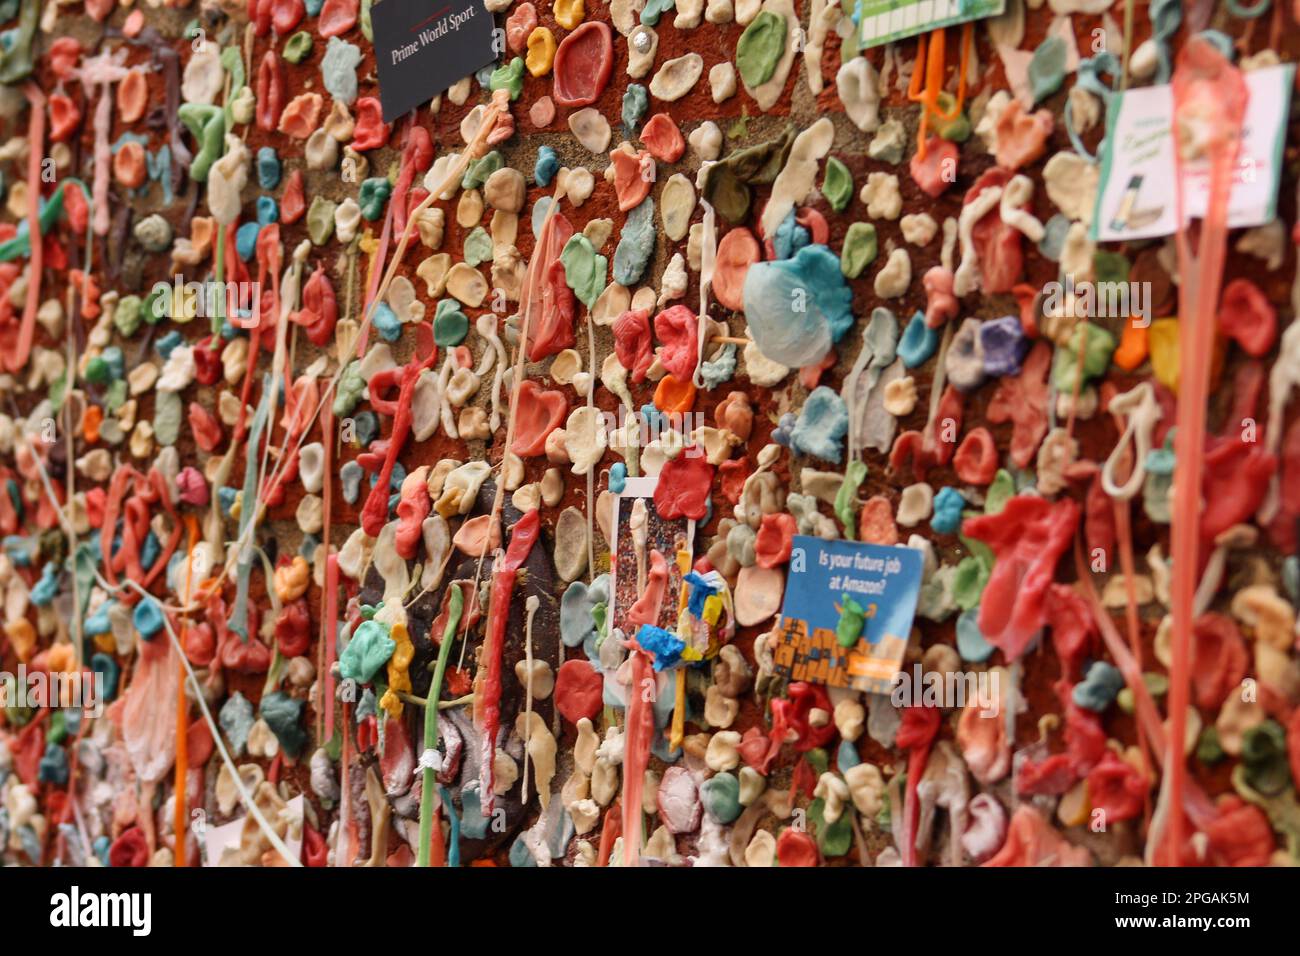 The Gum Wall, located in Post Alley, Seattle, Washington. Stock Photo